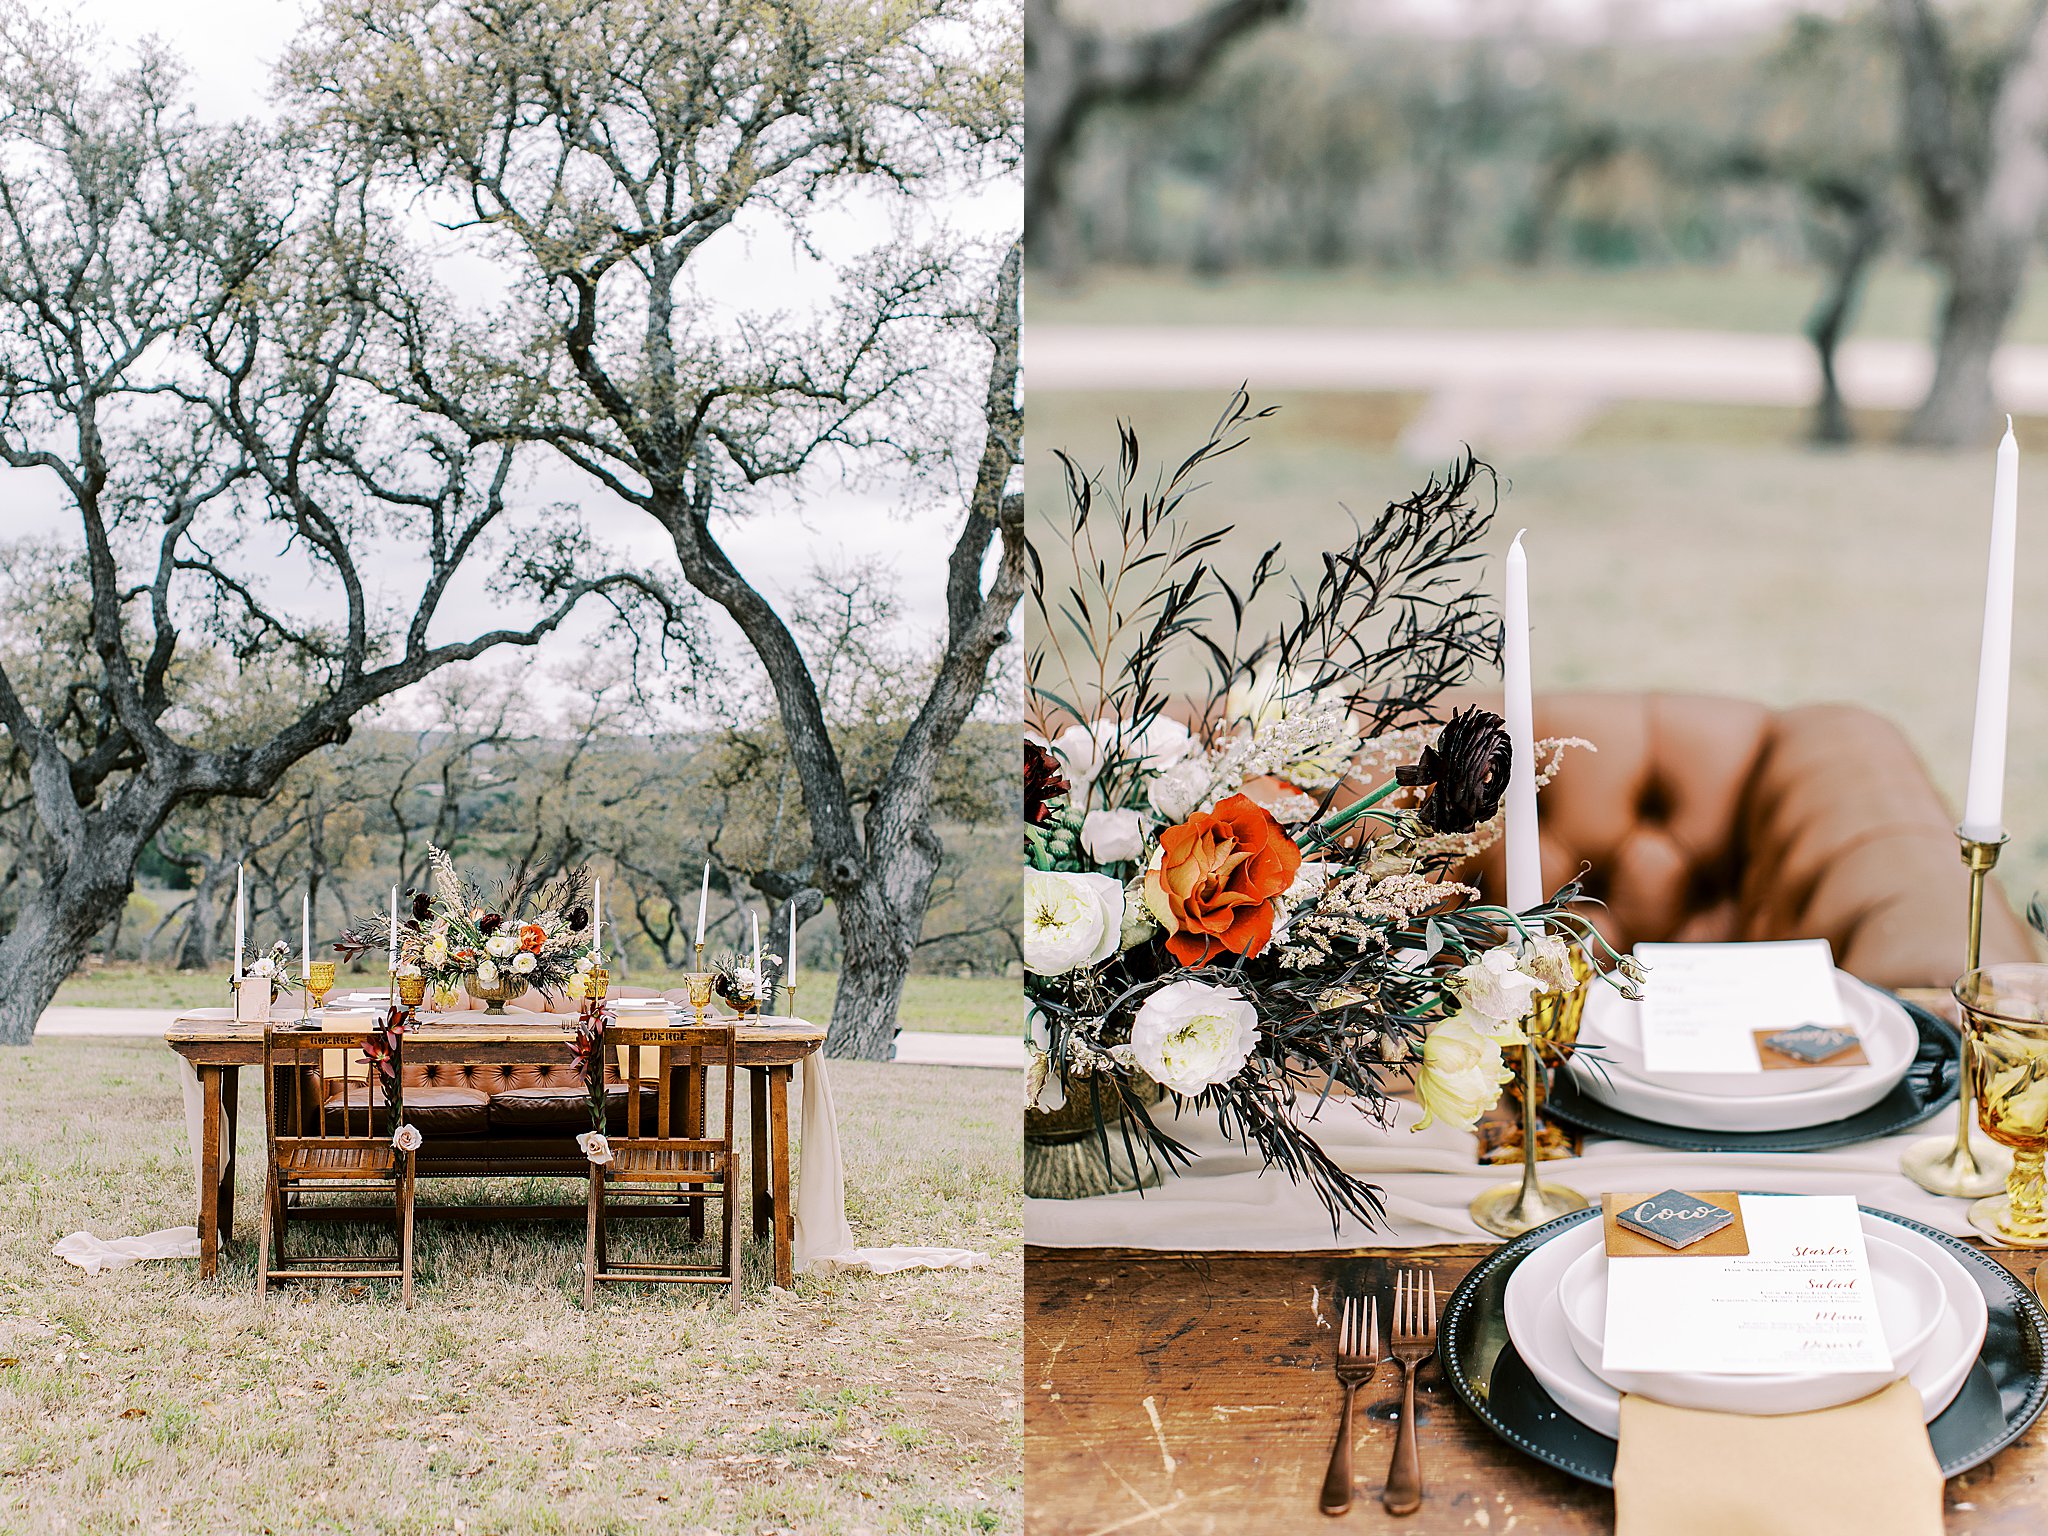 Leather couch rustic Fall wedding decor